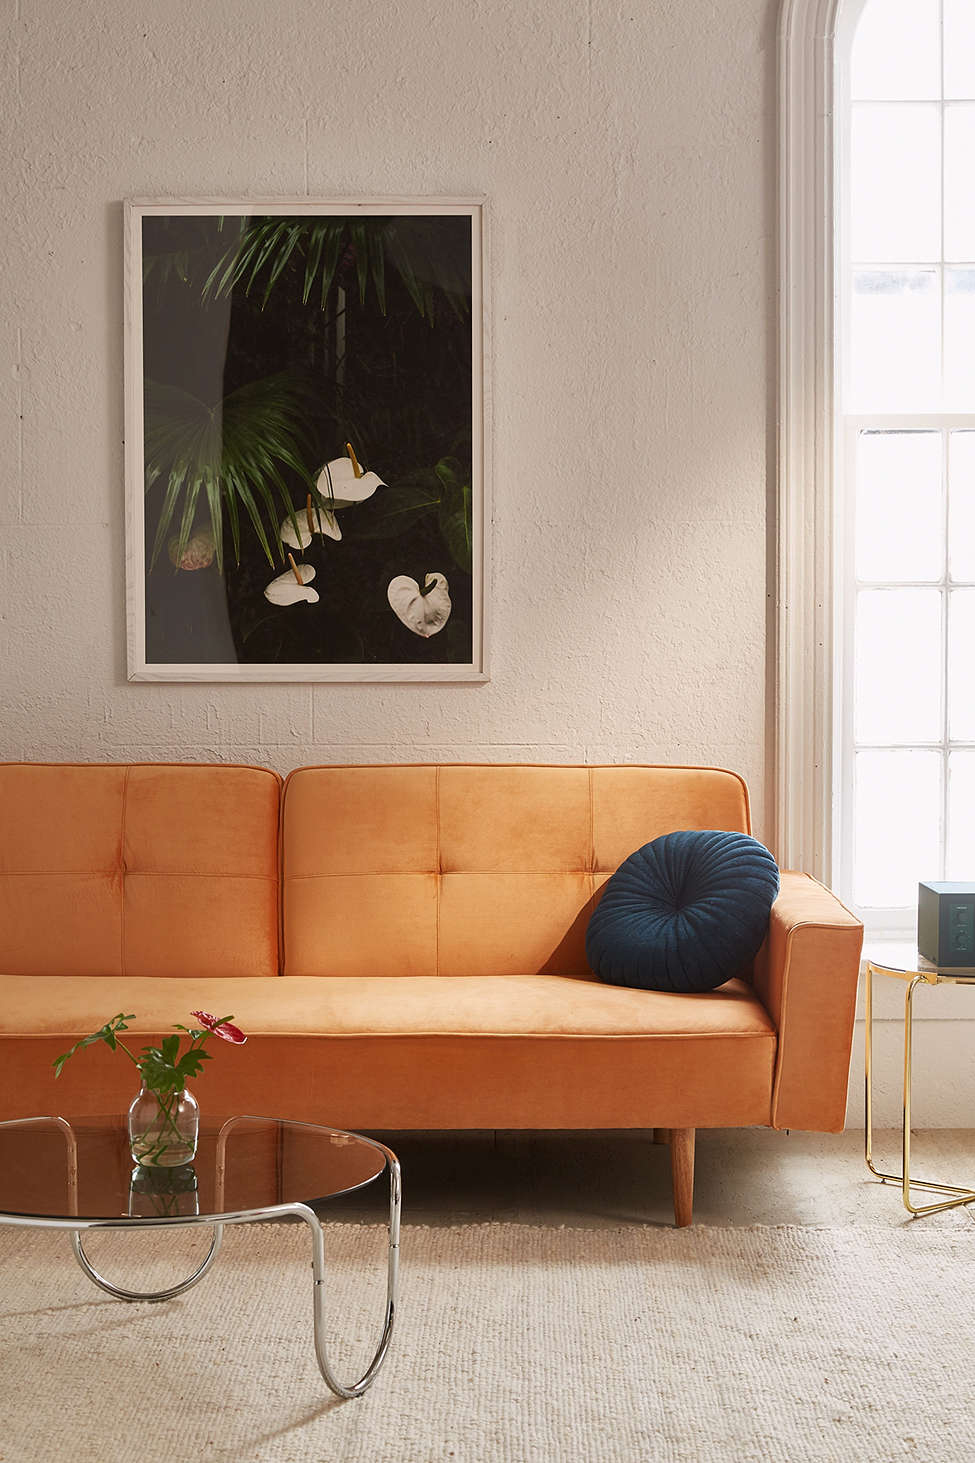 The Best Cheap Living Room Furniture That Isn't from Ikea